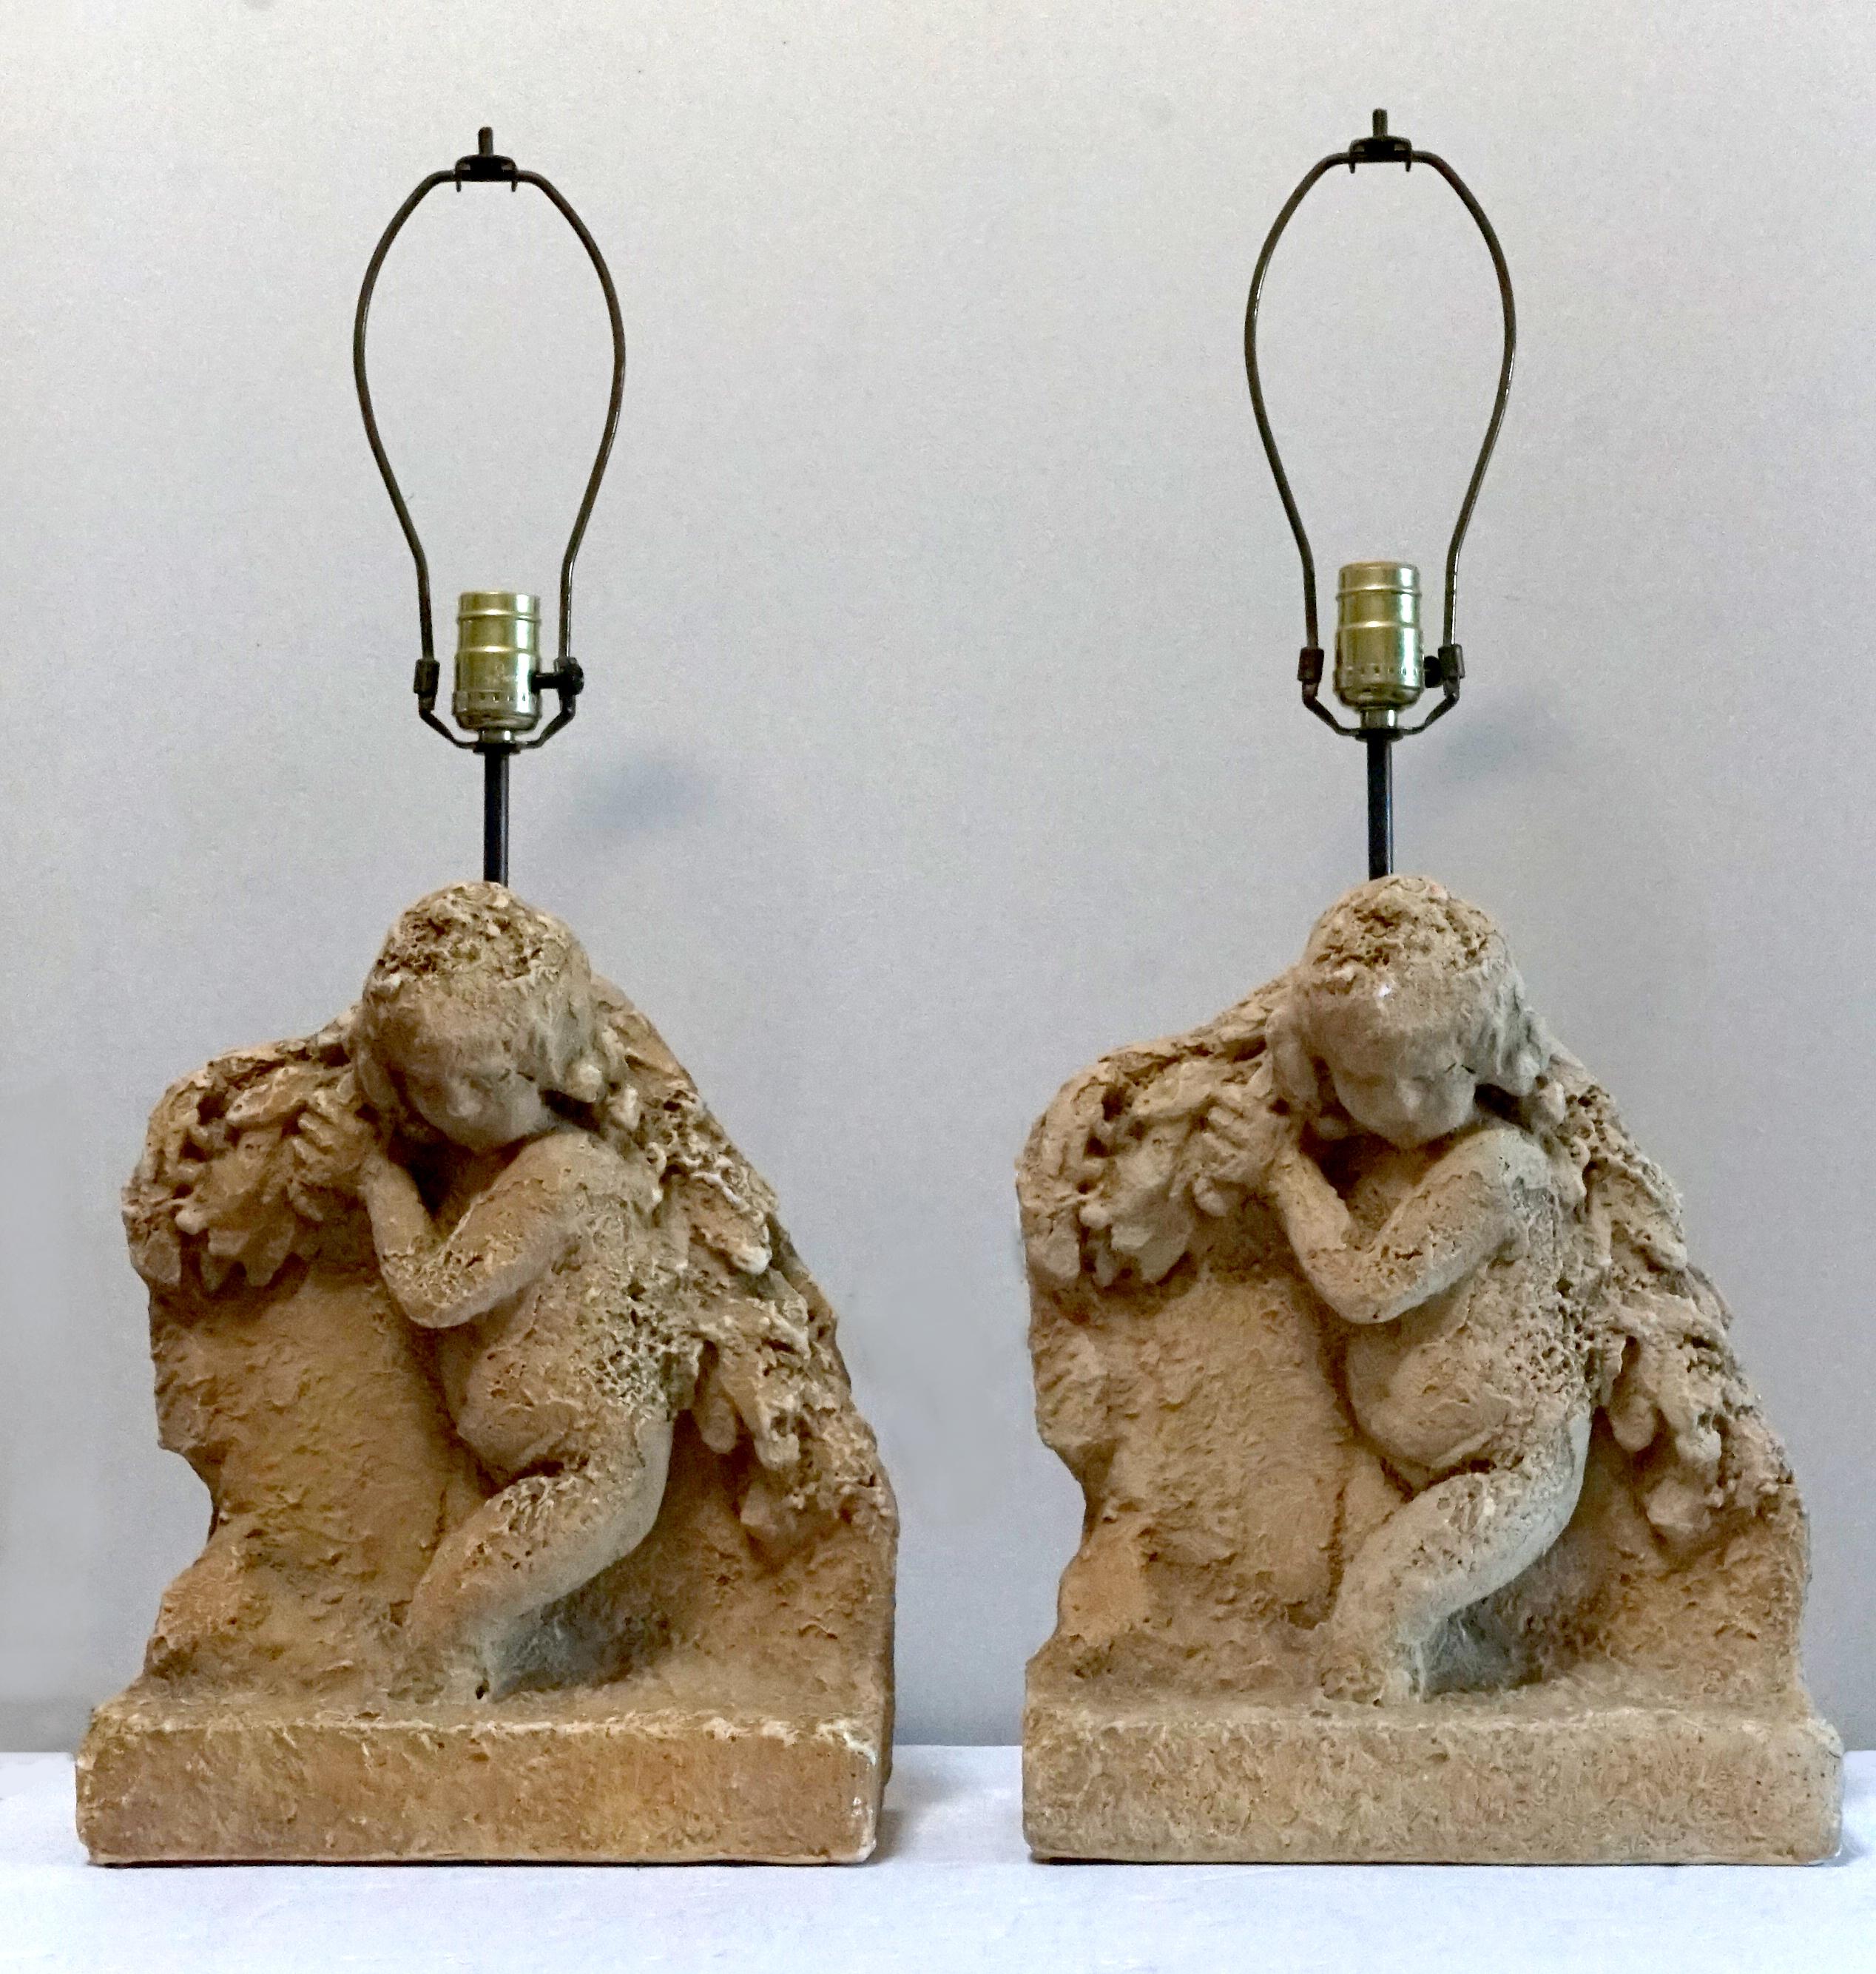 The antique look of 16th to 17th century stone or marble putti lends a classic look to these cherubic table lamps that is priceless. The lamps rest on stands with resin-cast bodies. The stands are made after coat-holding putti of the 16th or 17th